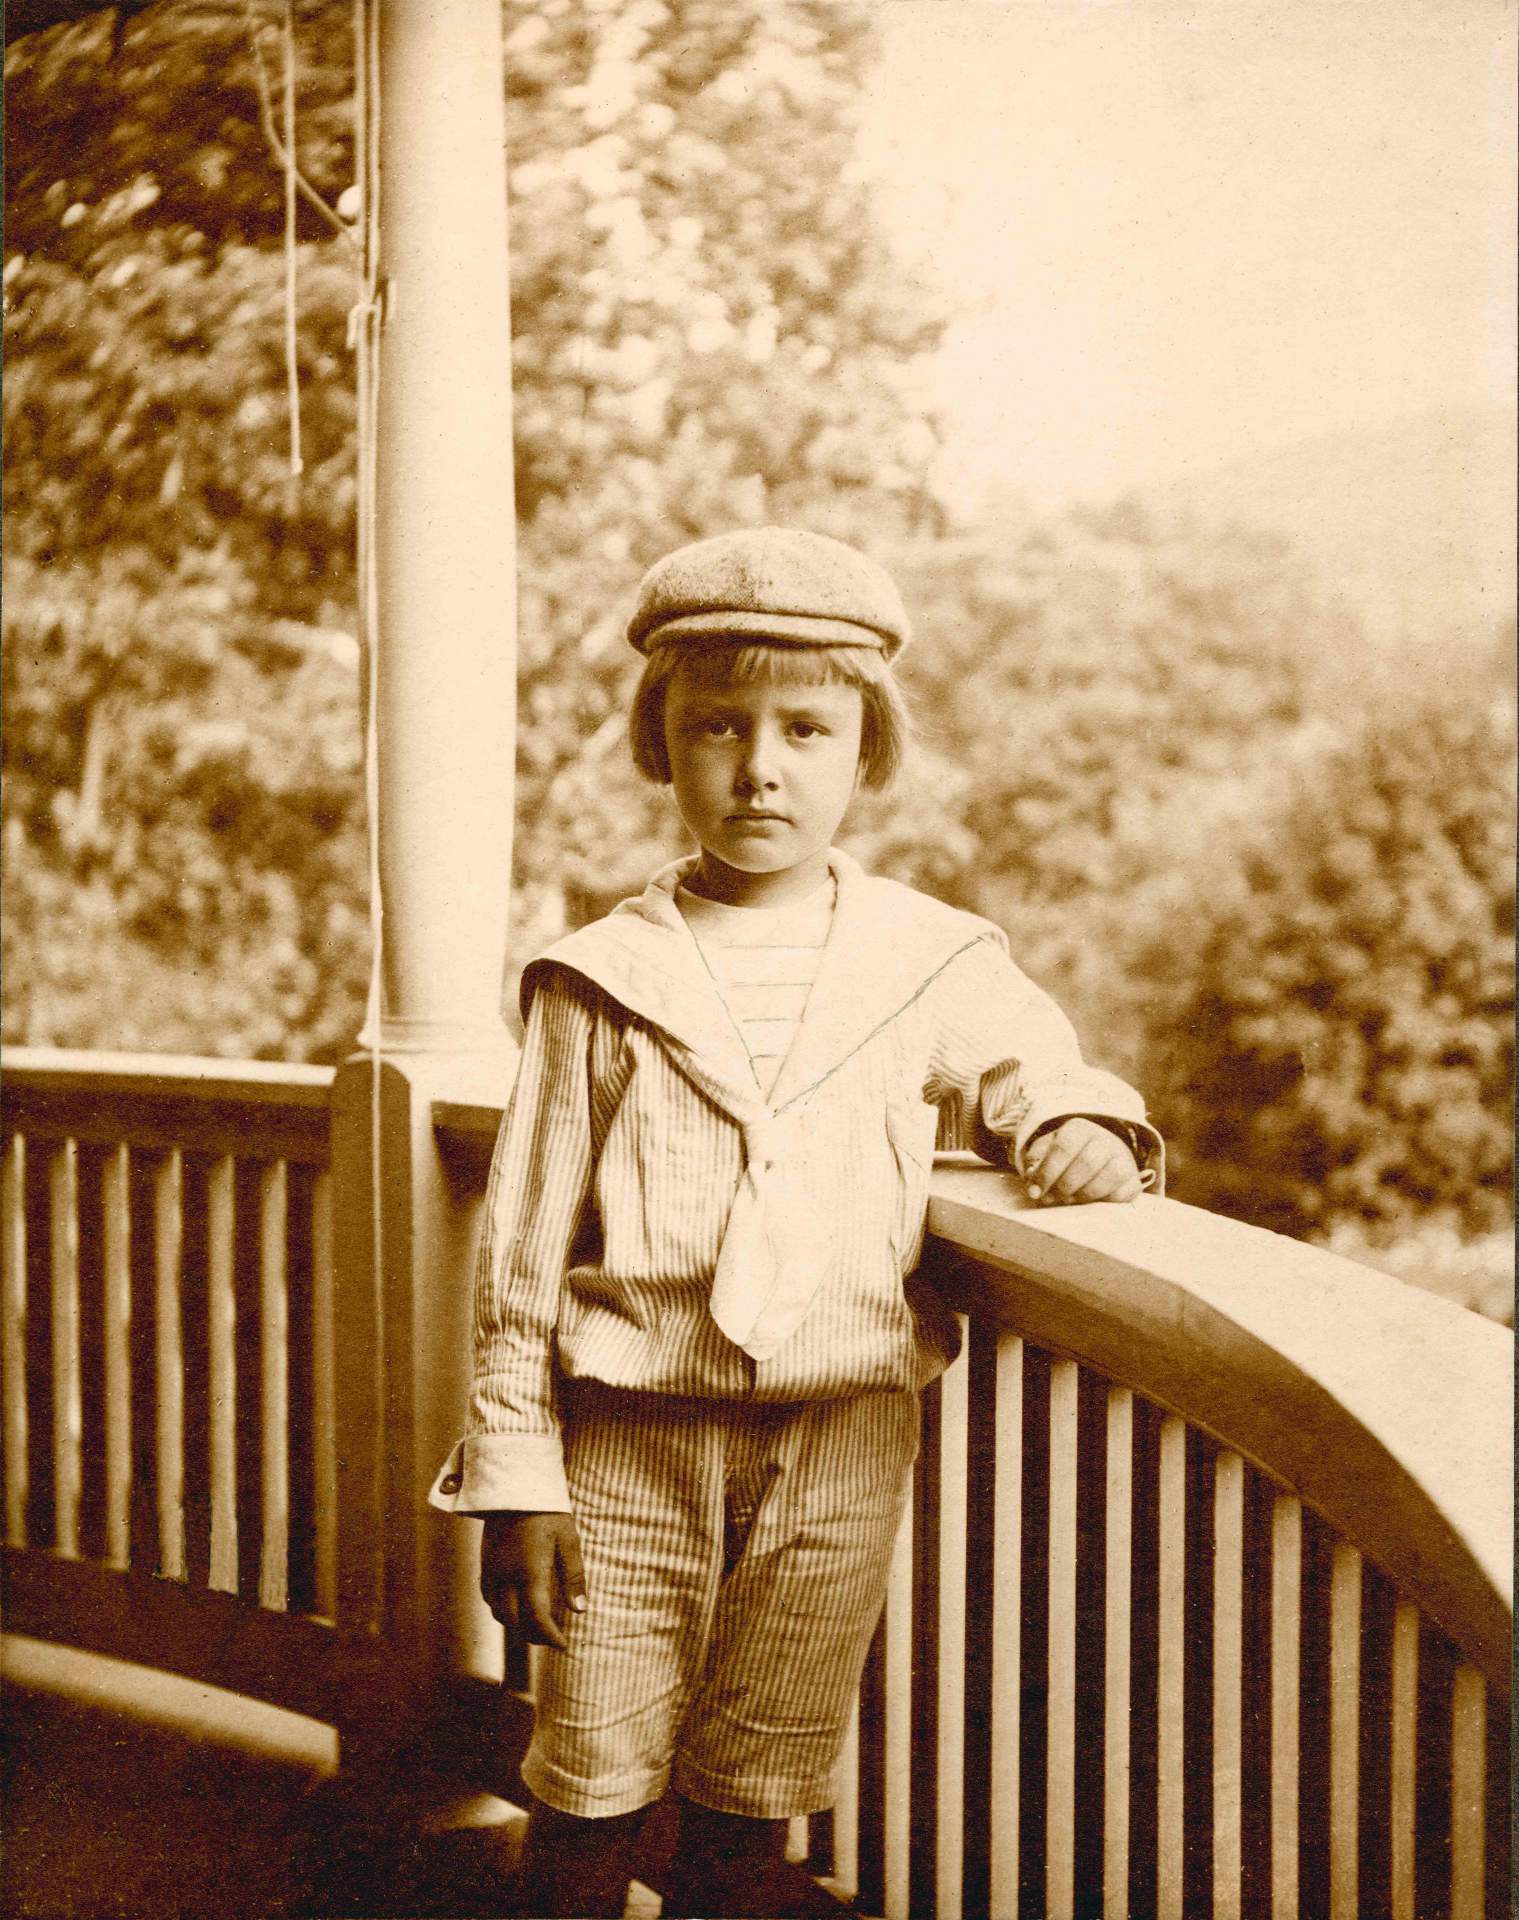 Charles Cary Rumsey, portrait as boy standing on a porch